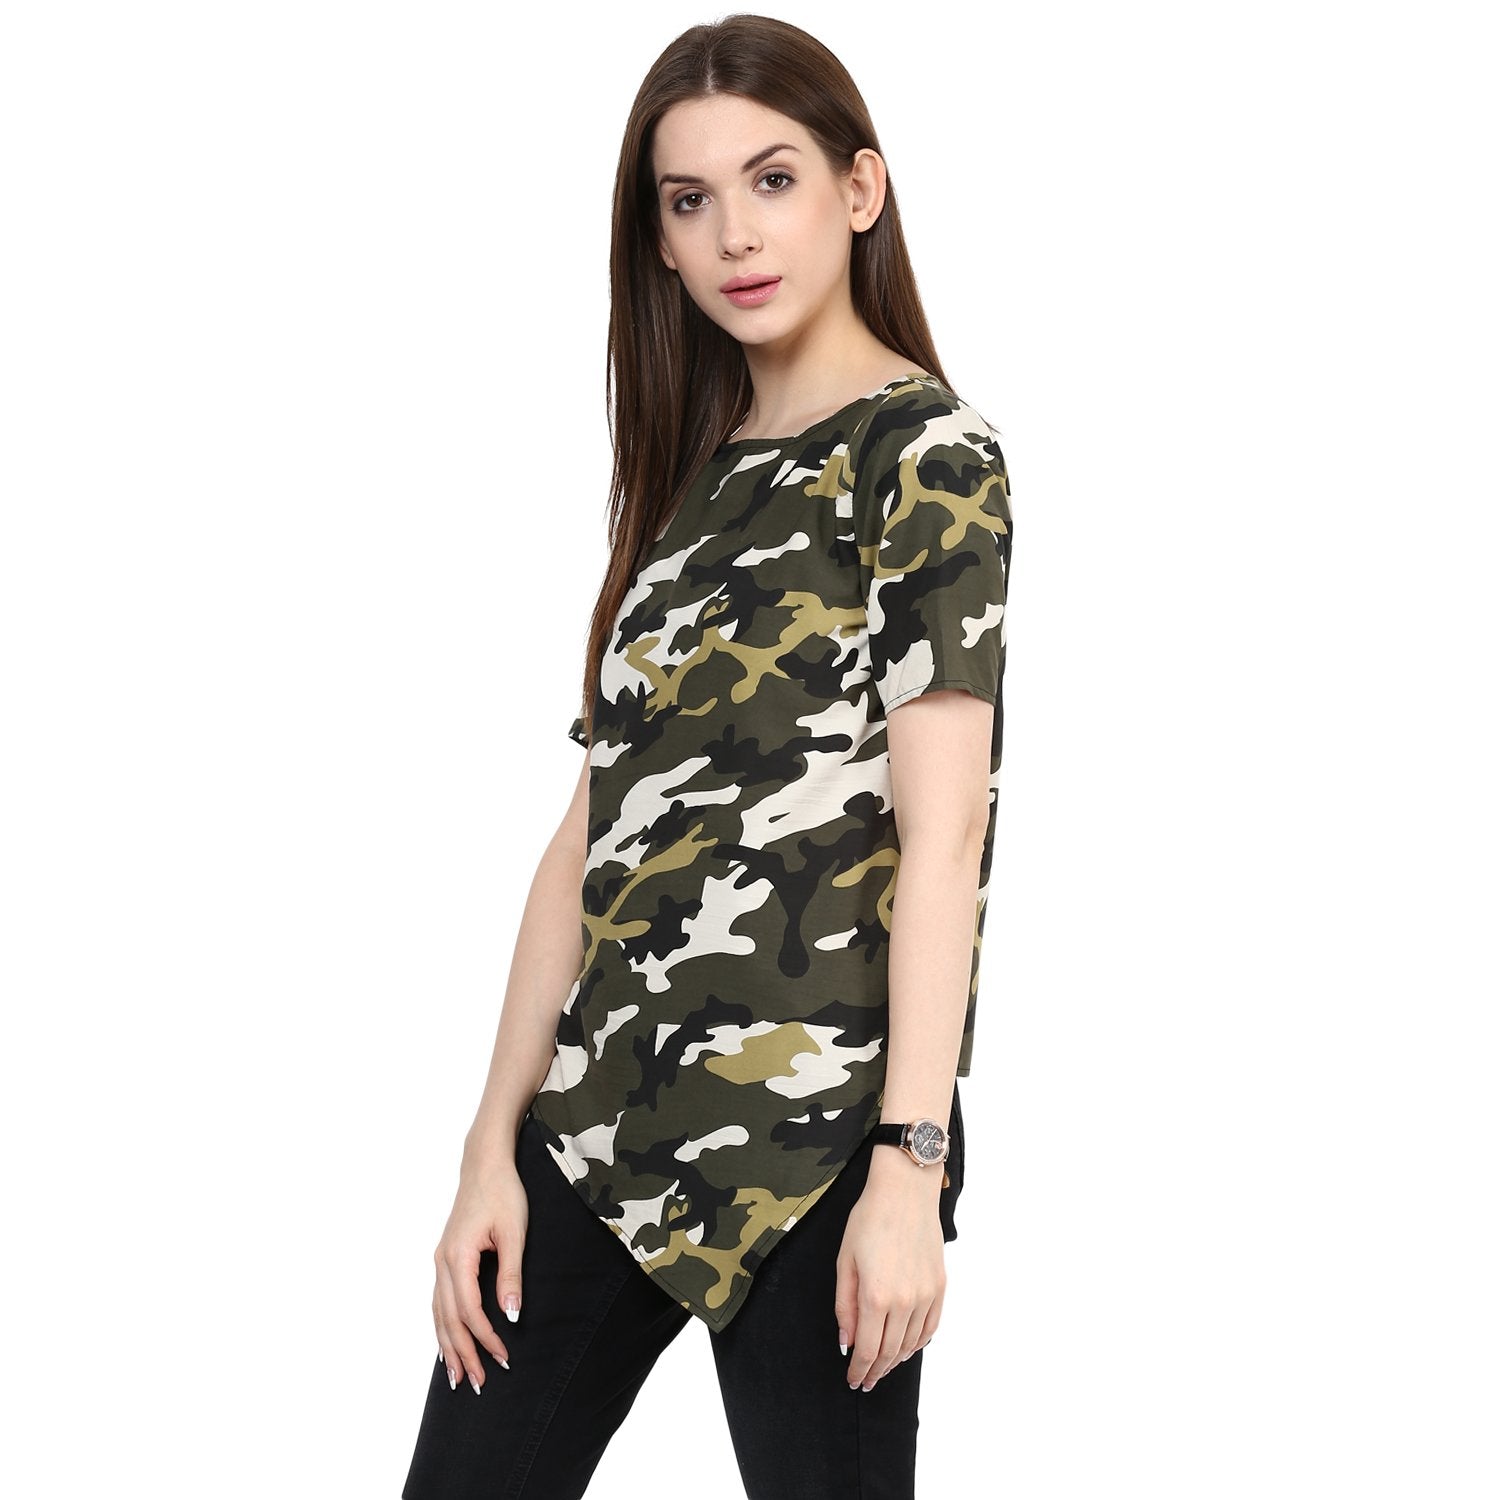 Women's Military Front V-Cut Top - Pannkh